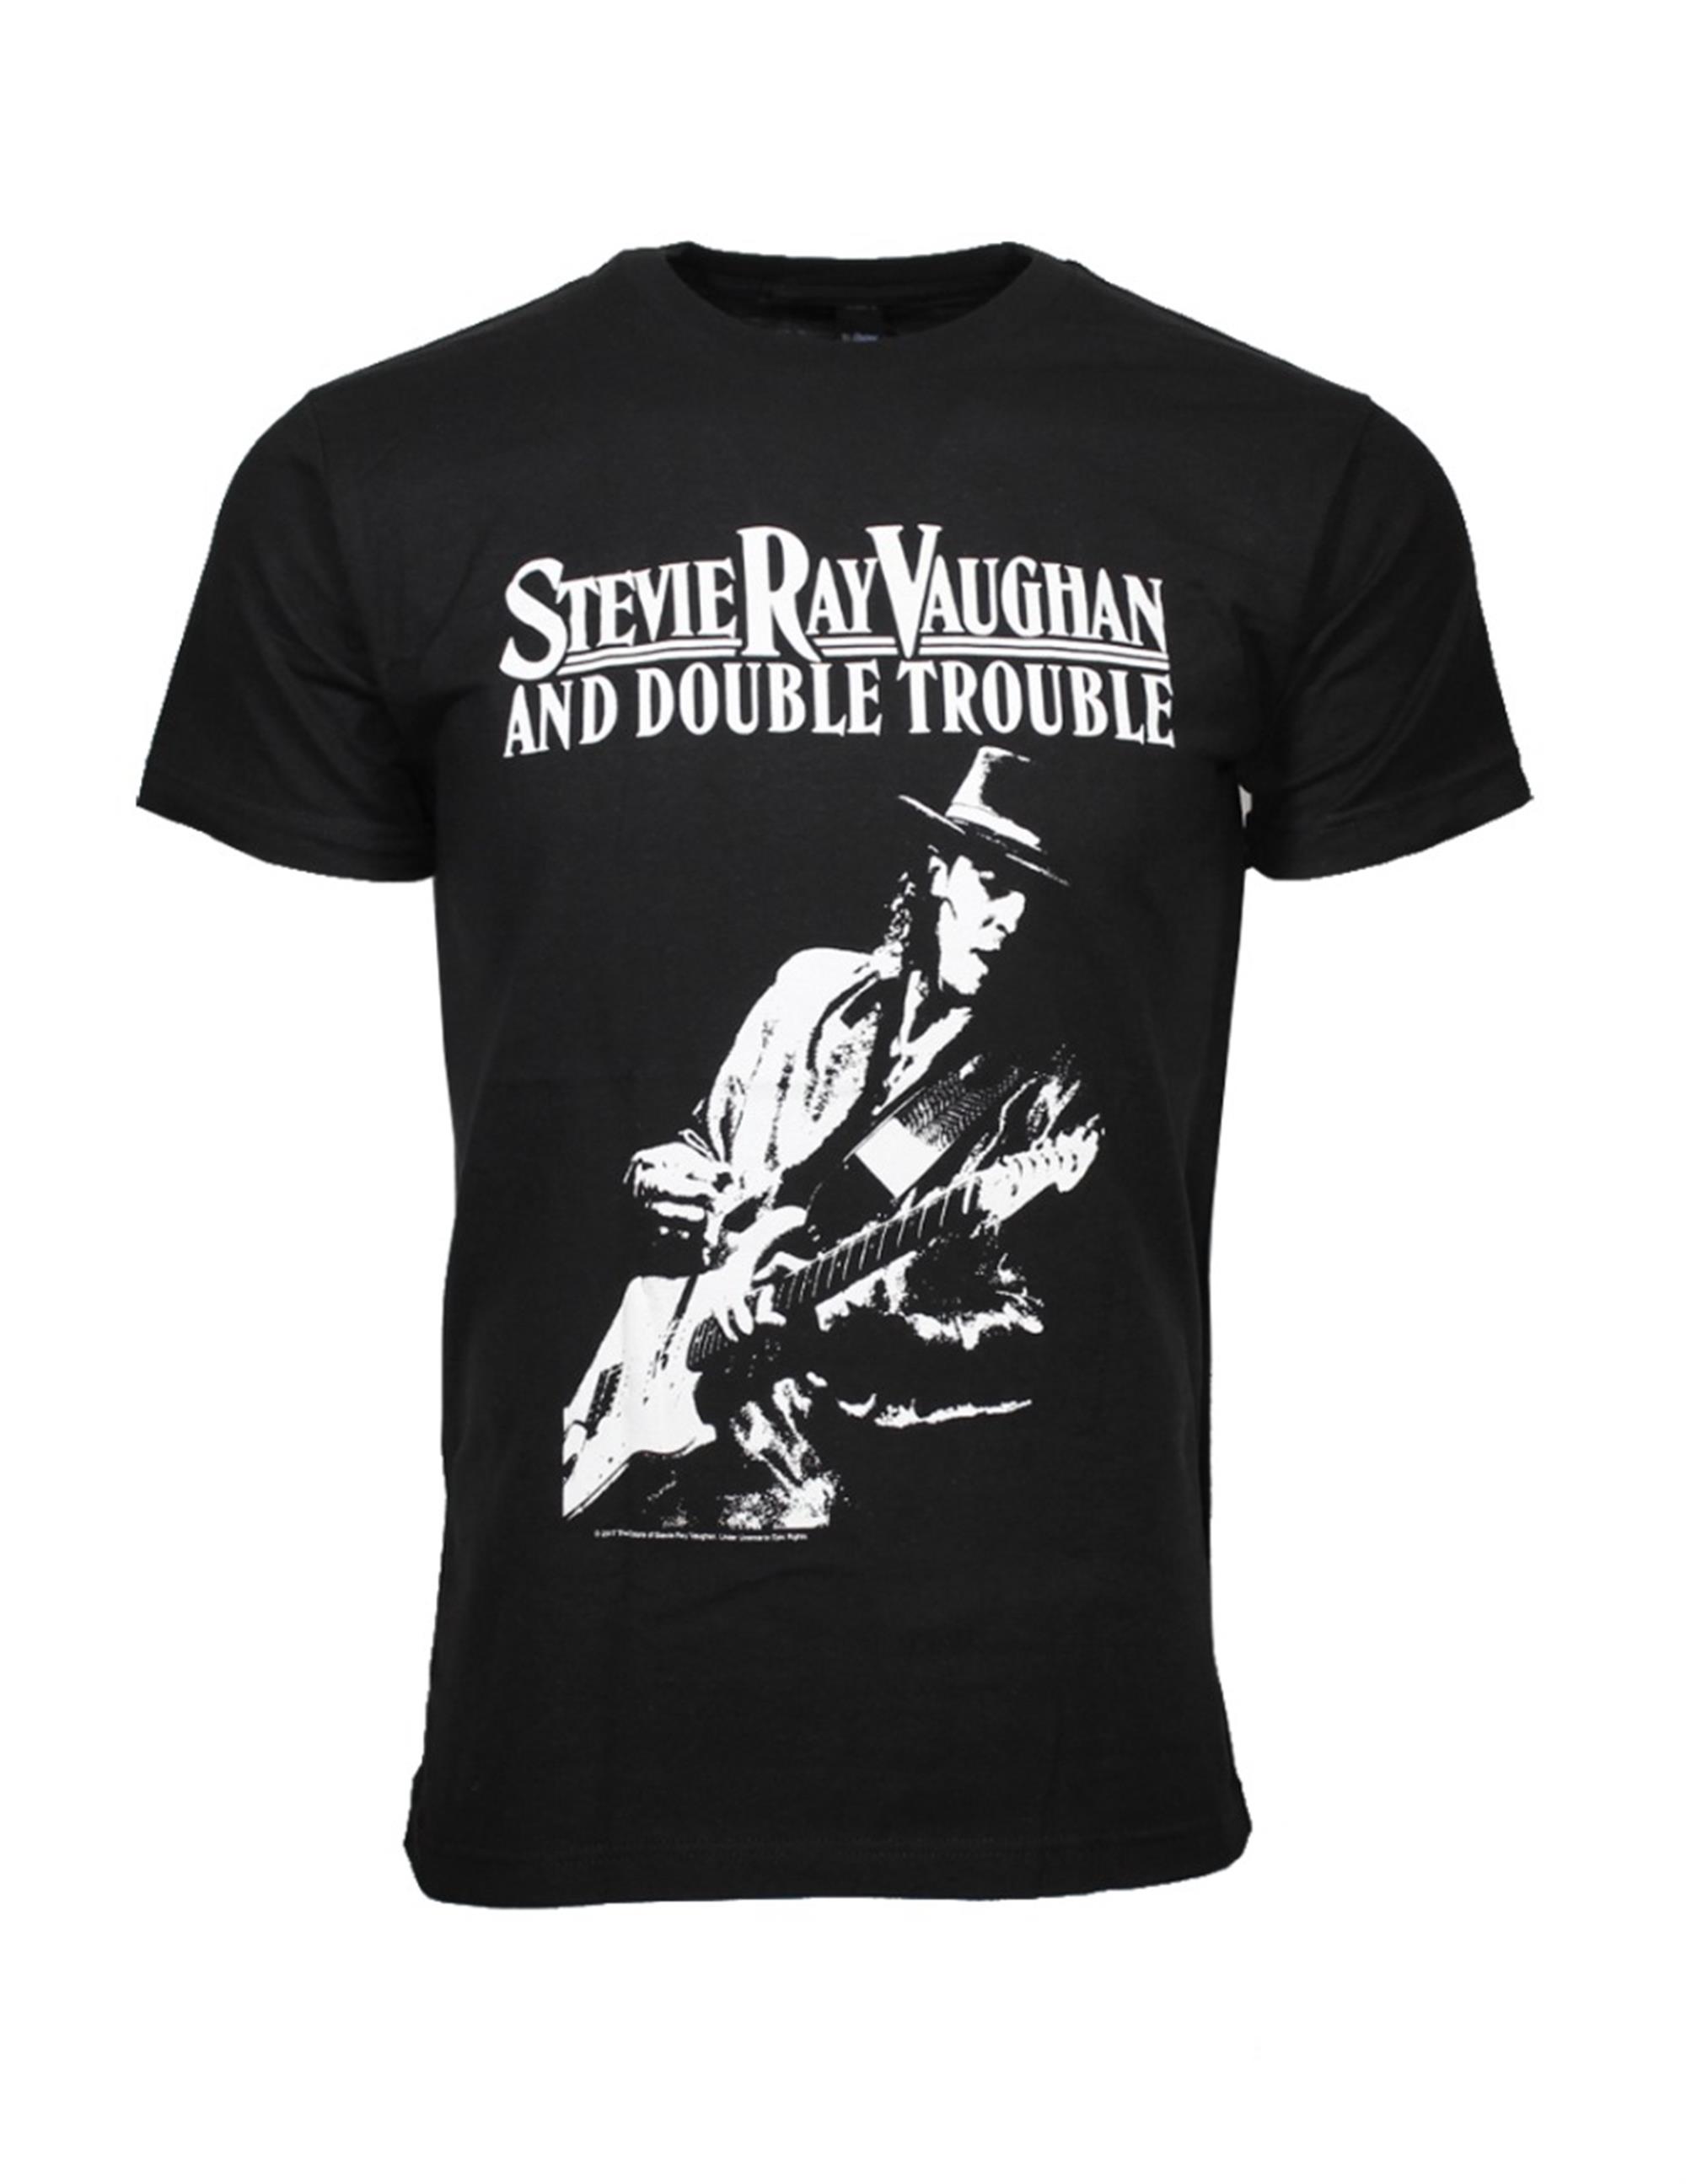 Stevie Ray Vaughan Live Alive T-Shirt